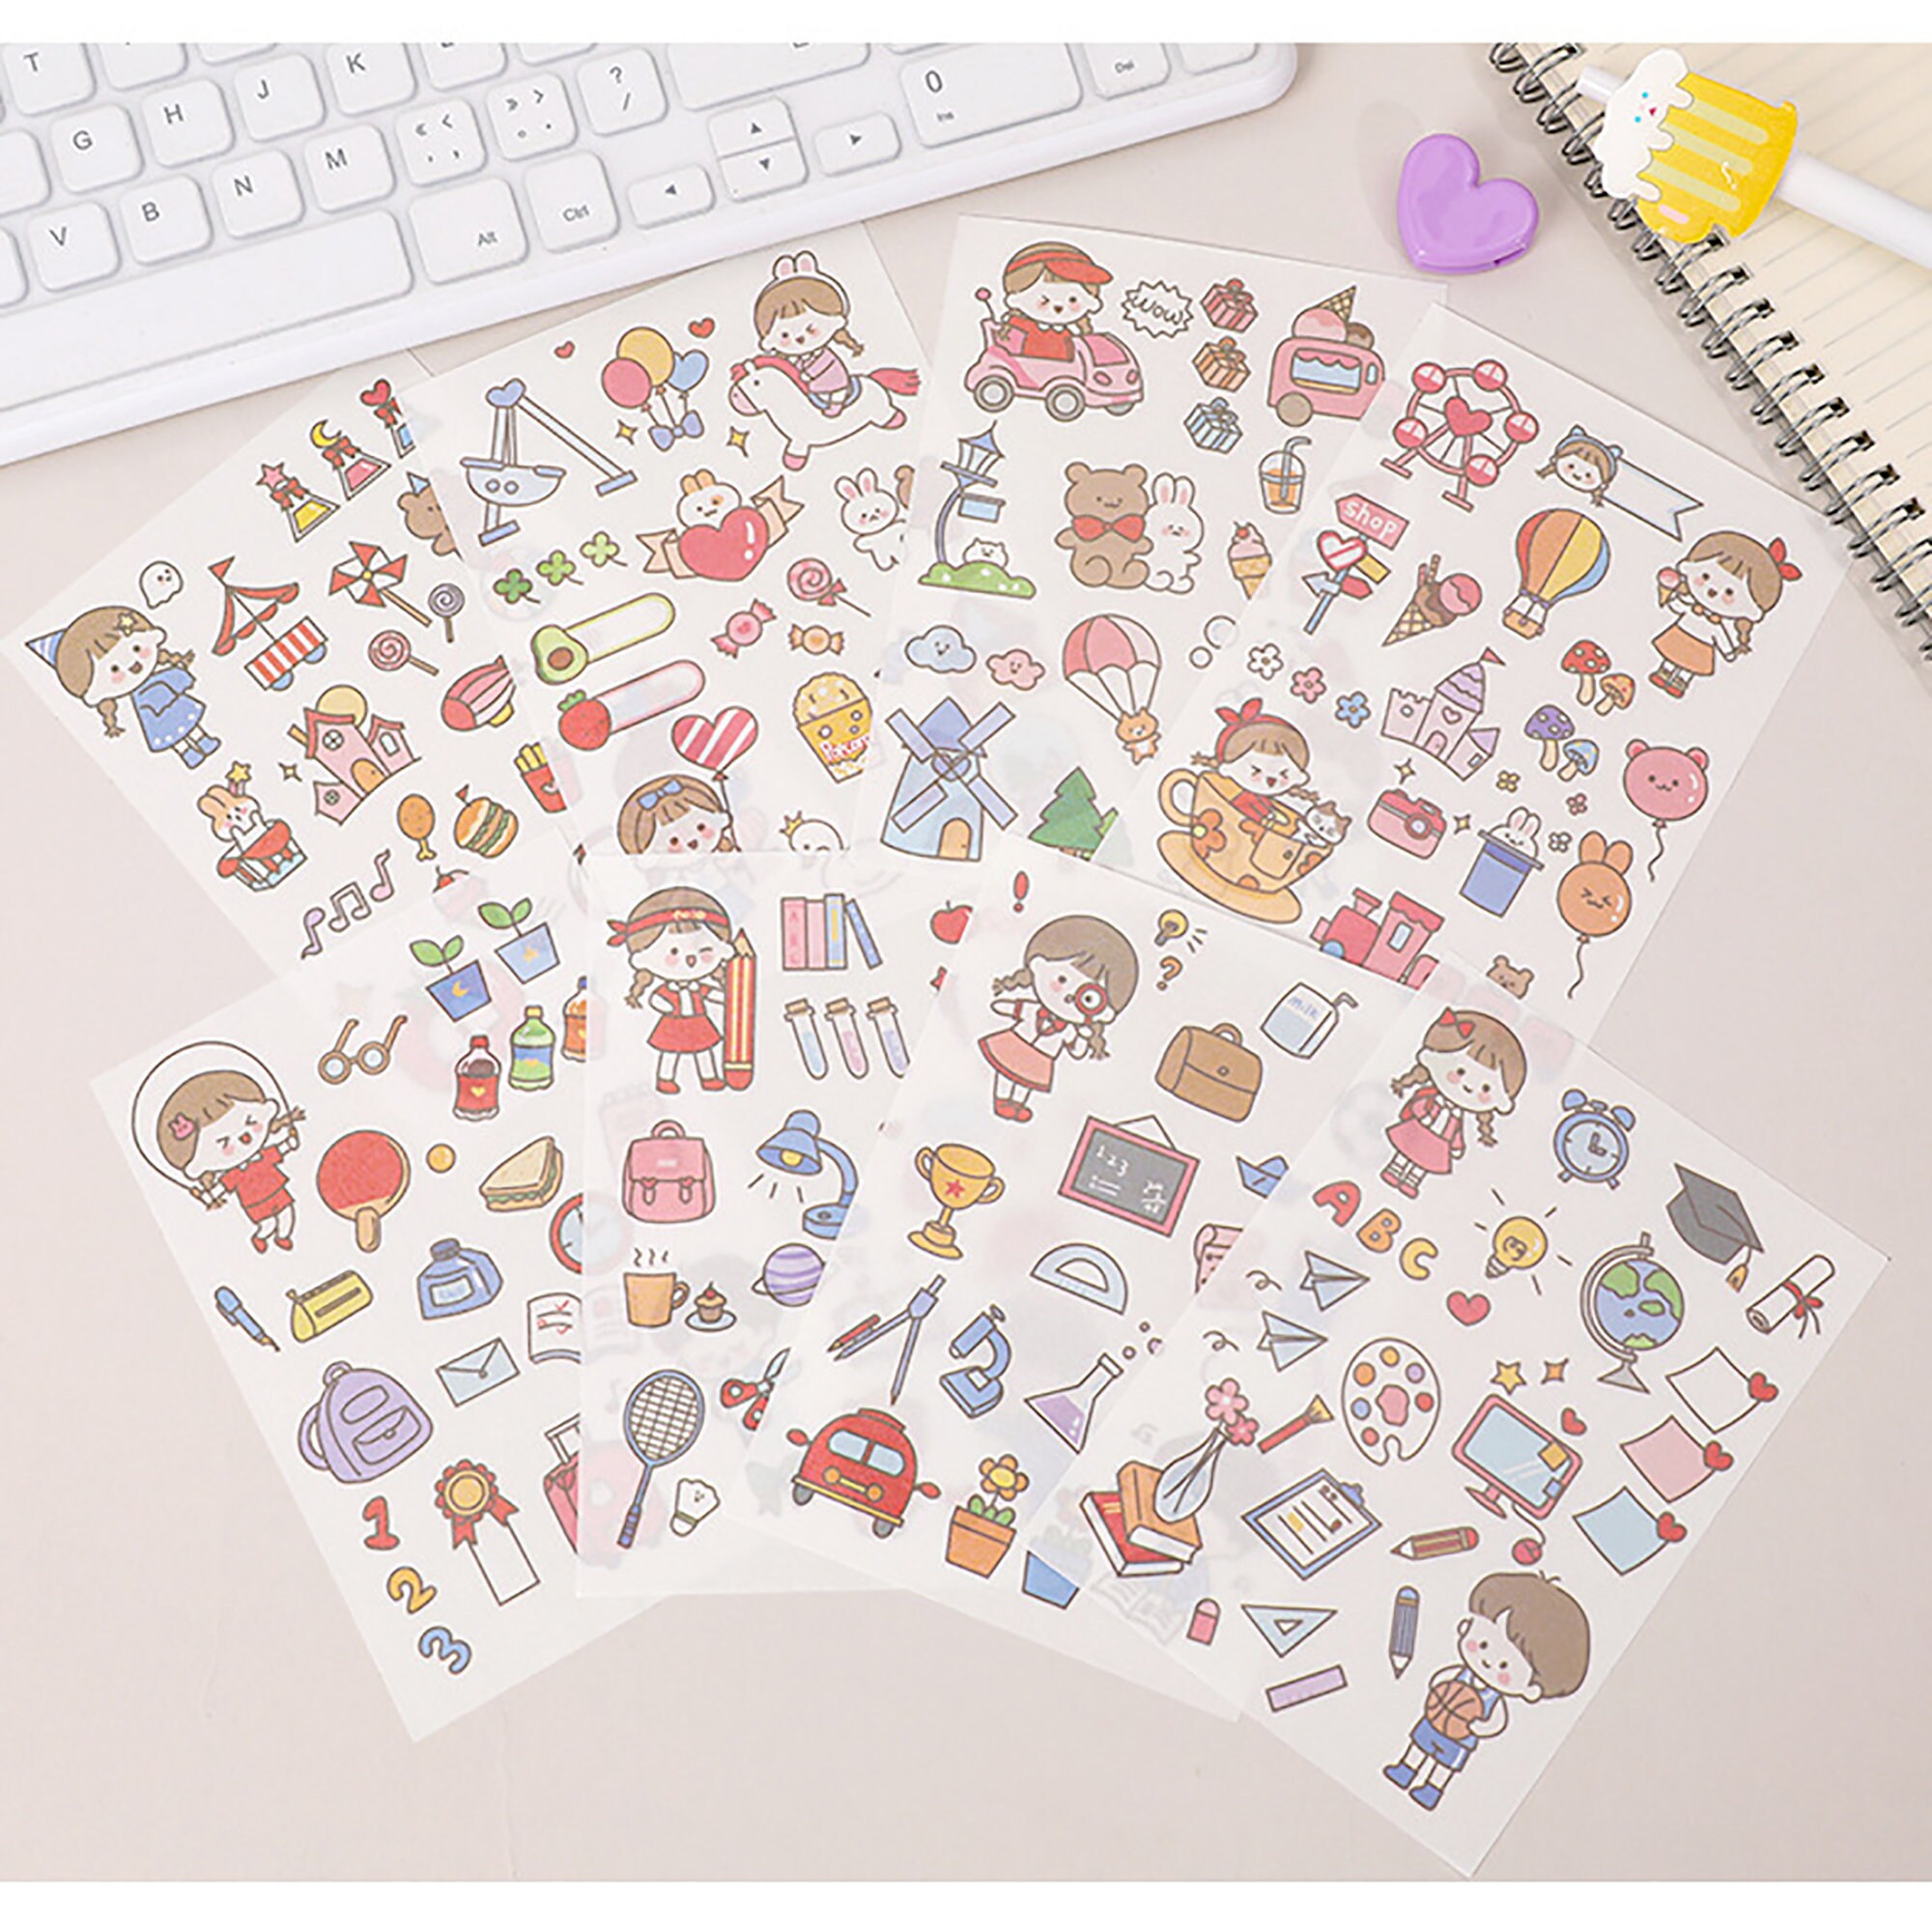 Daily Life Stickers, Beach Day Stickers, Washi Paper Stickers